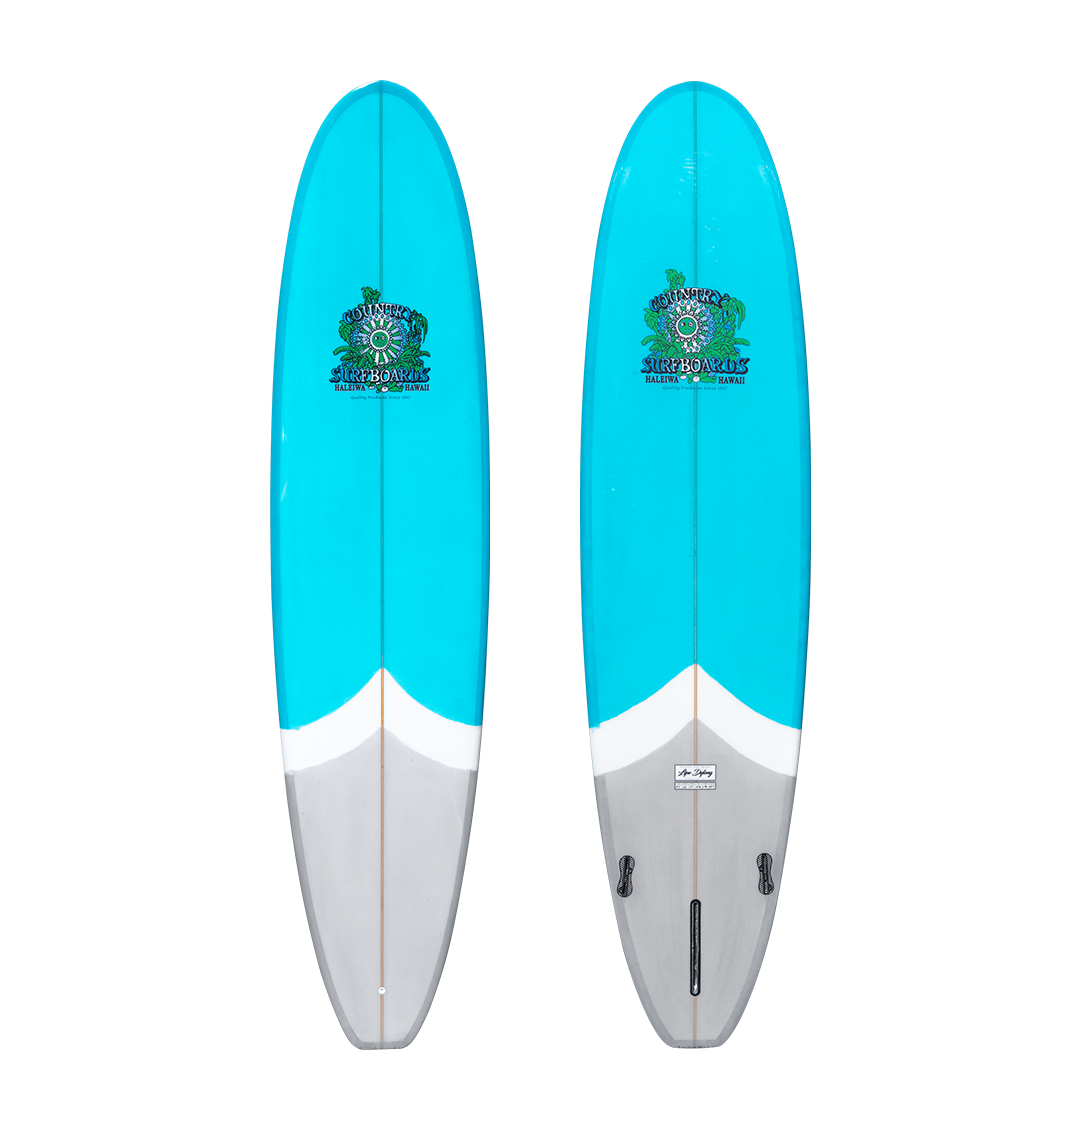 Country Surfboards Europe S/S 22 Surfboards PreviewFunboard